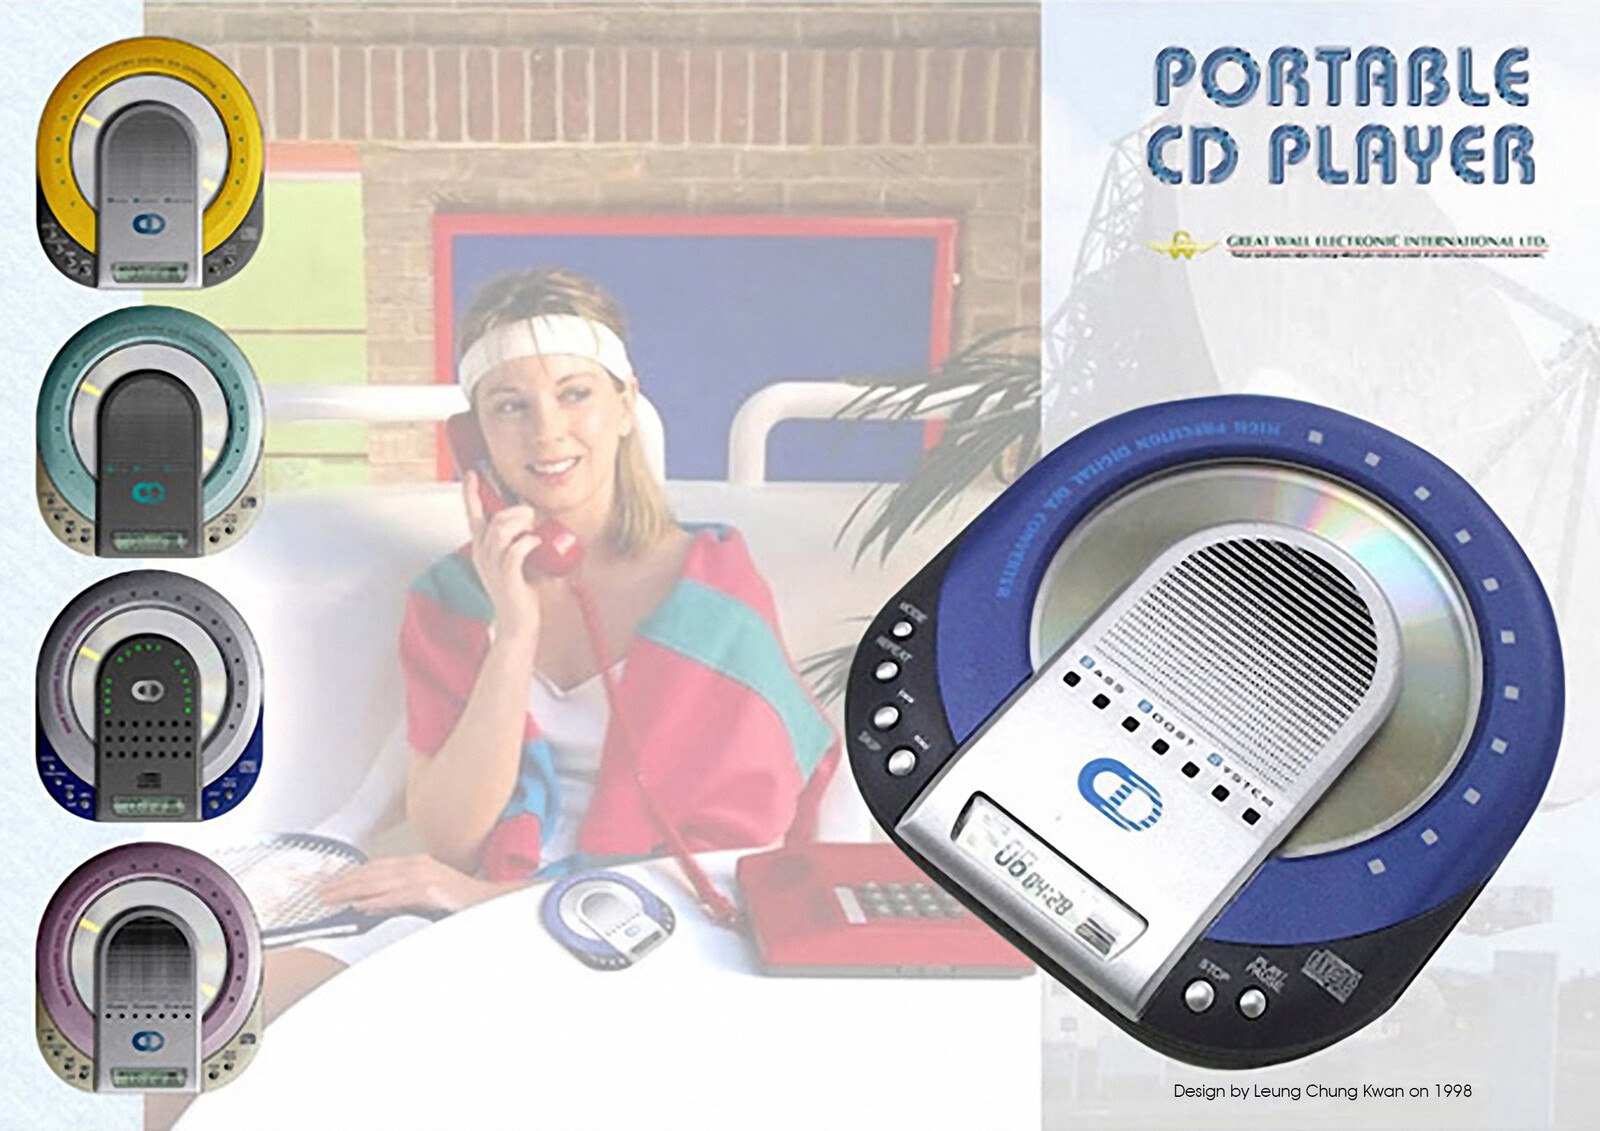 💎 Portable CD Player | Design by Leung Chung Kwan on 1998 💎
Client︰Great Wall Electronics International Limited